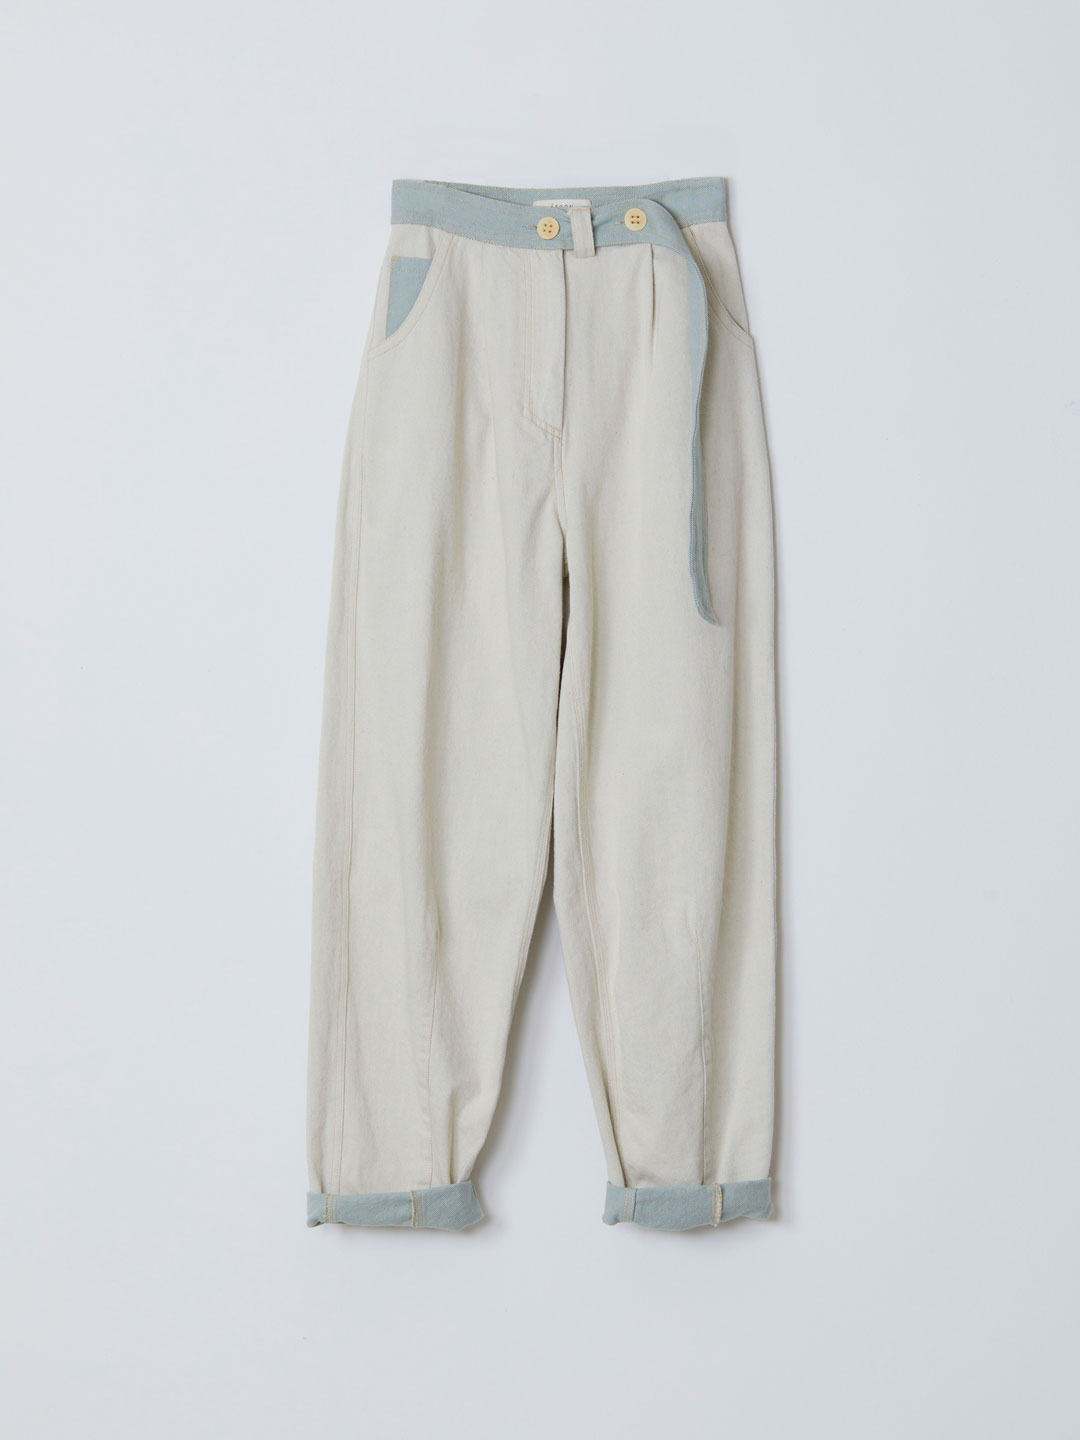 COPPELIA / Belted Utility Jeans - Light Blue